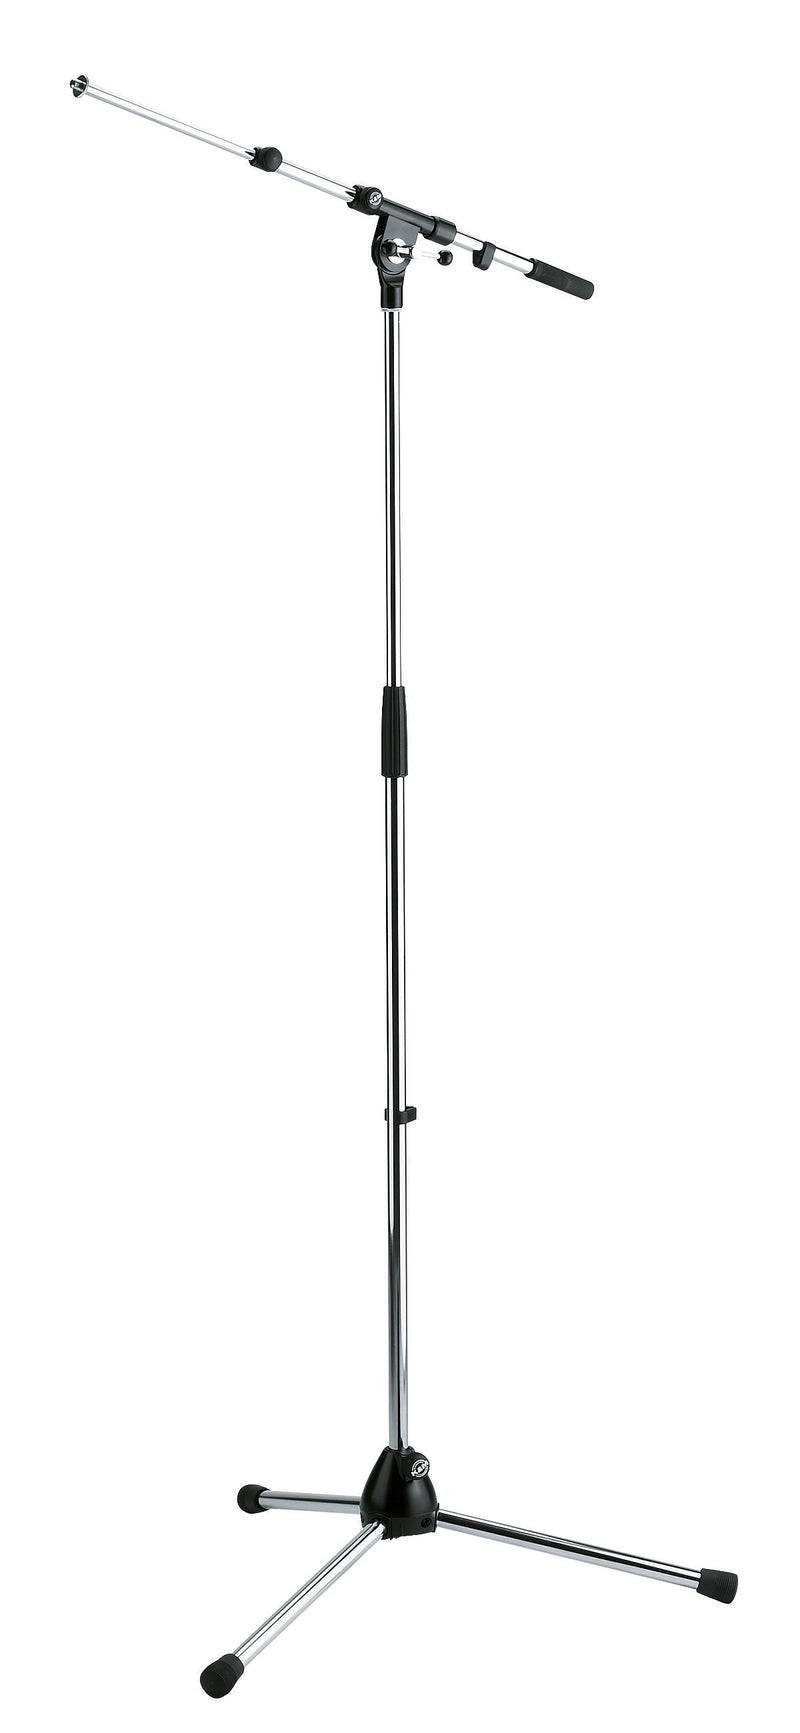 K&M 210/9 MICROPHONE BOOM STAND with Height and Boom Adjustments | 5 Year Warranty